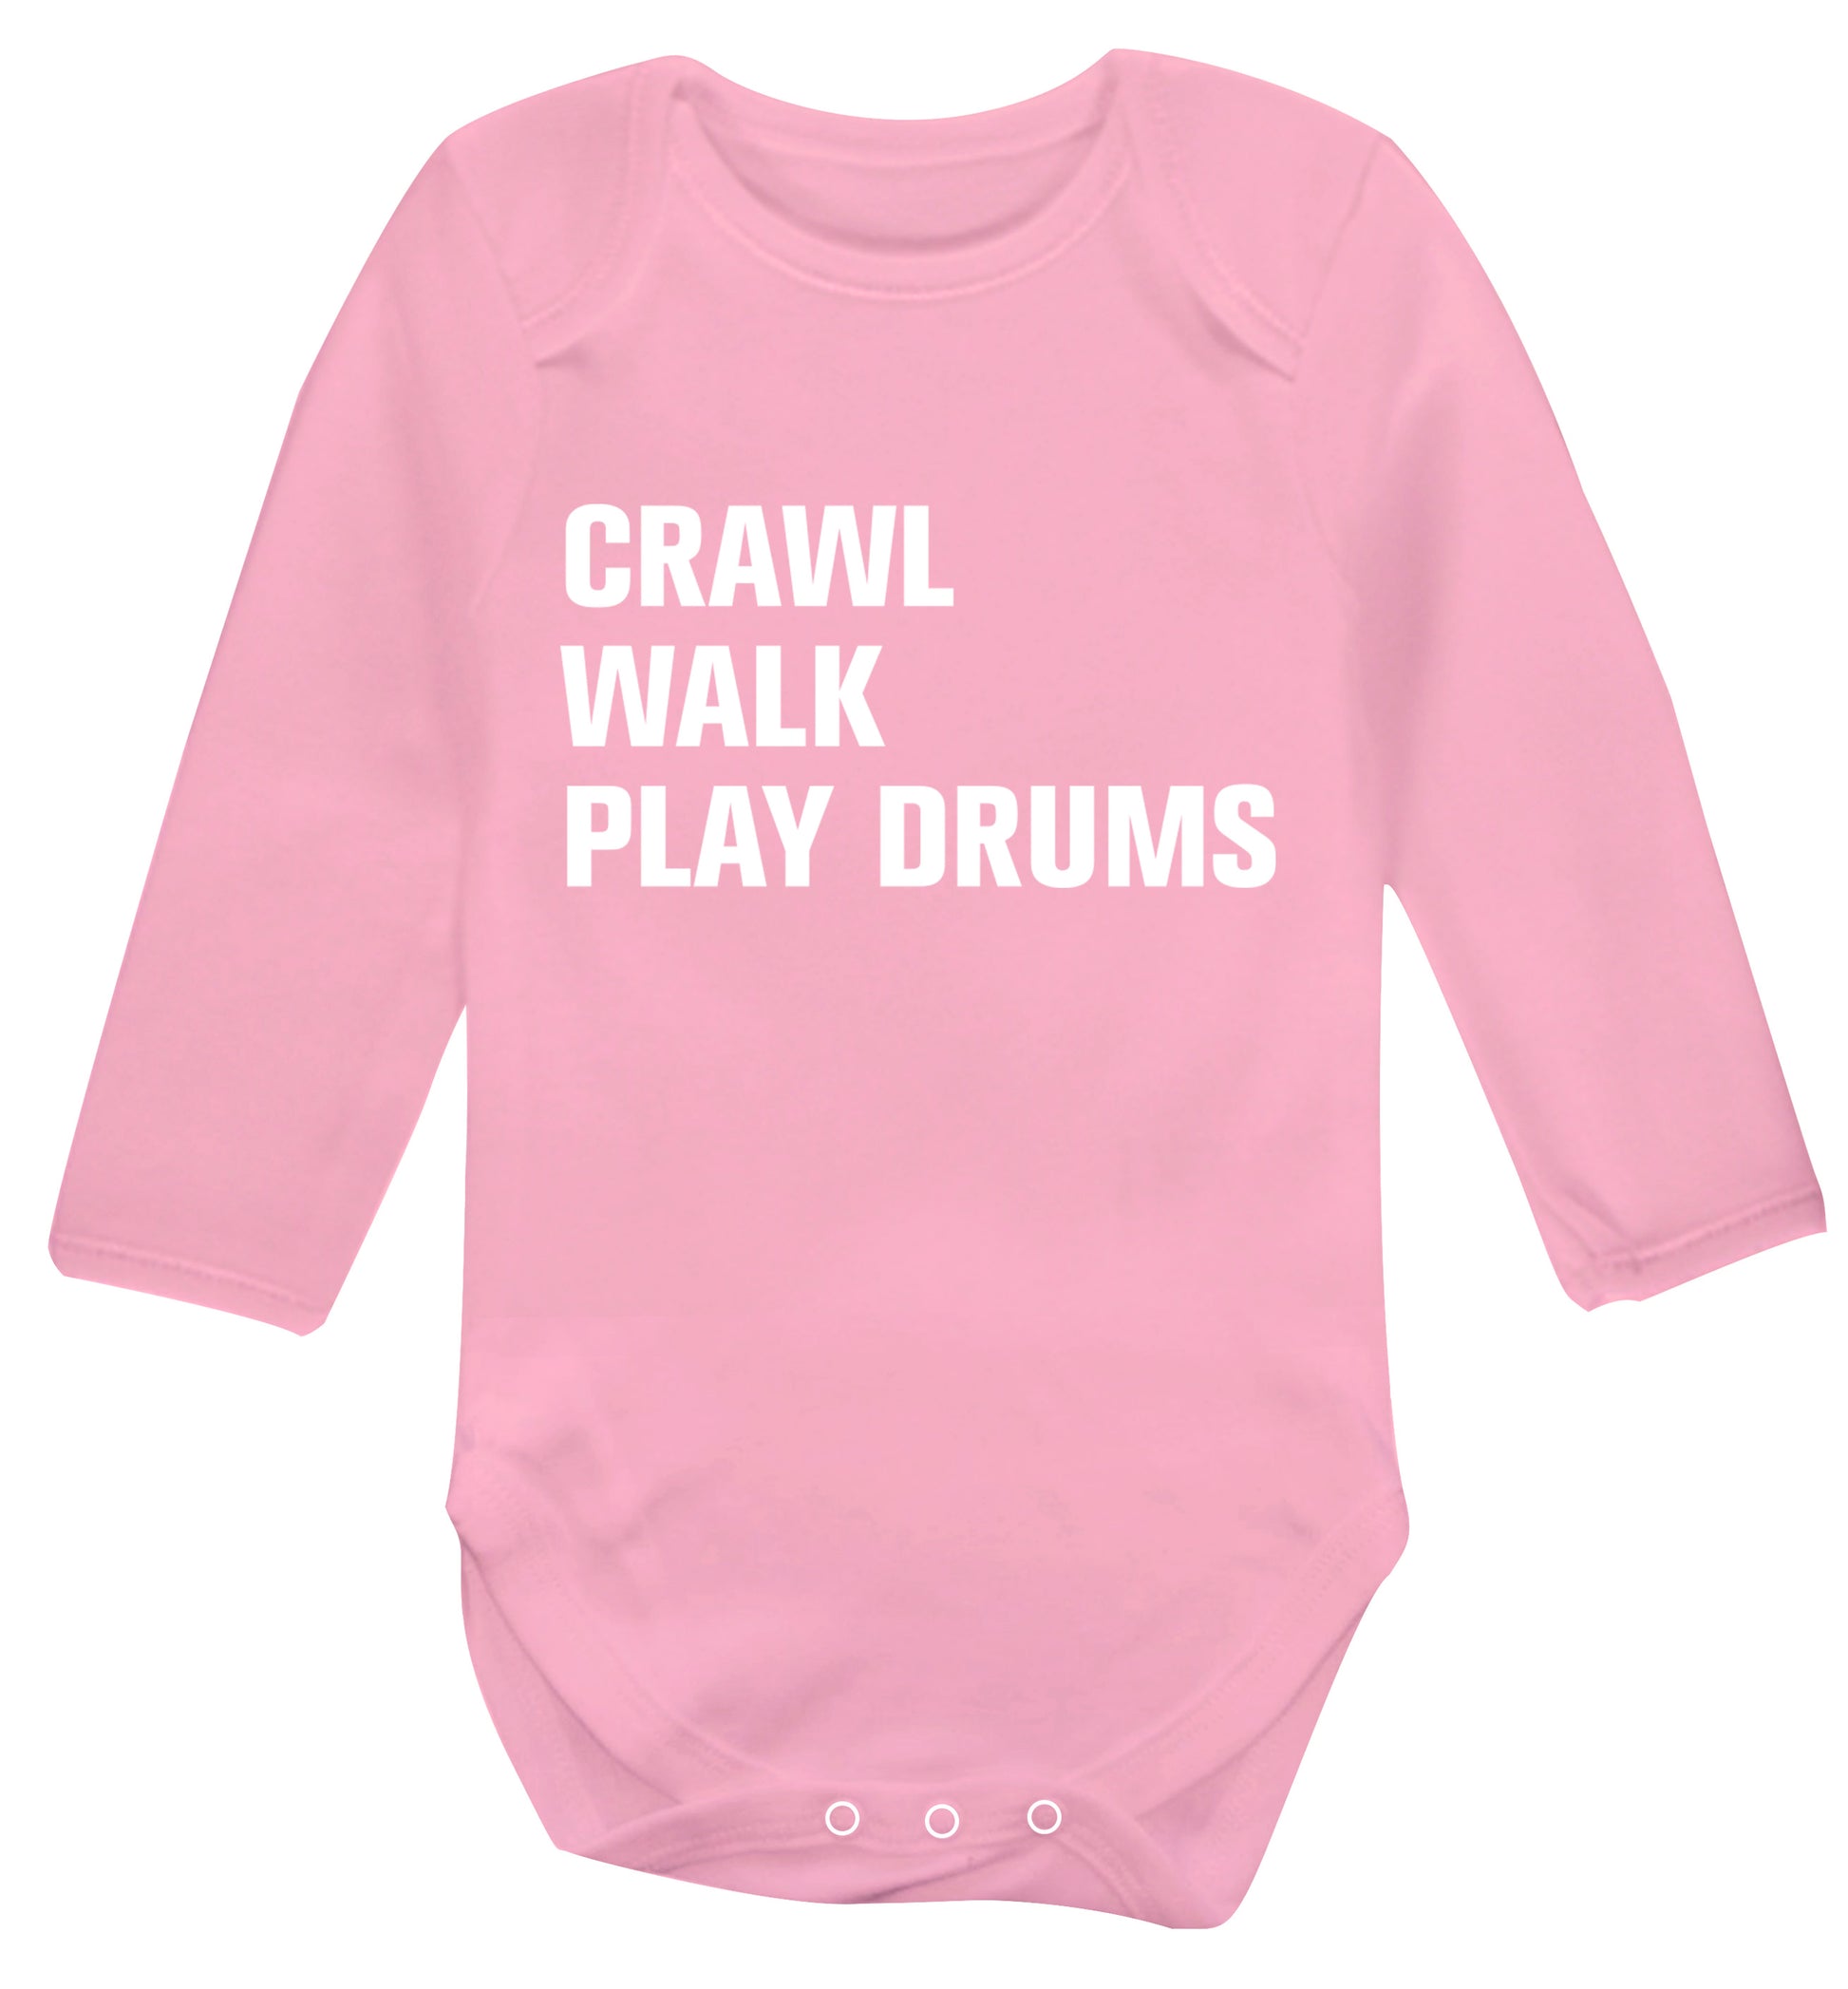 Crawl walk play drums Baby Vest long sleeved pale pink 6-12 months